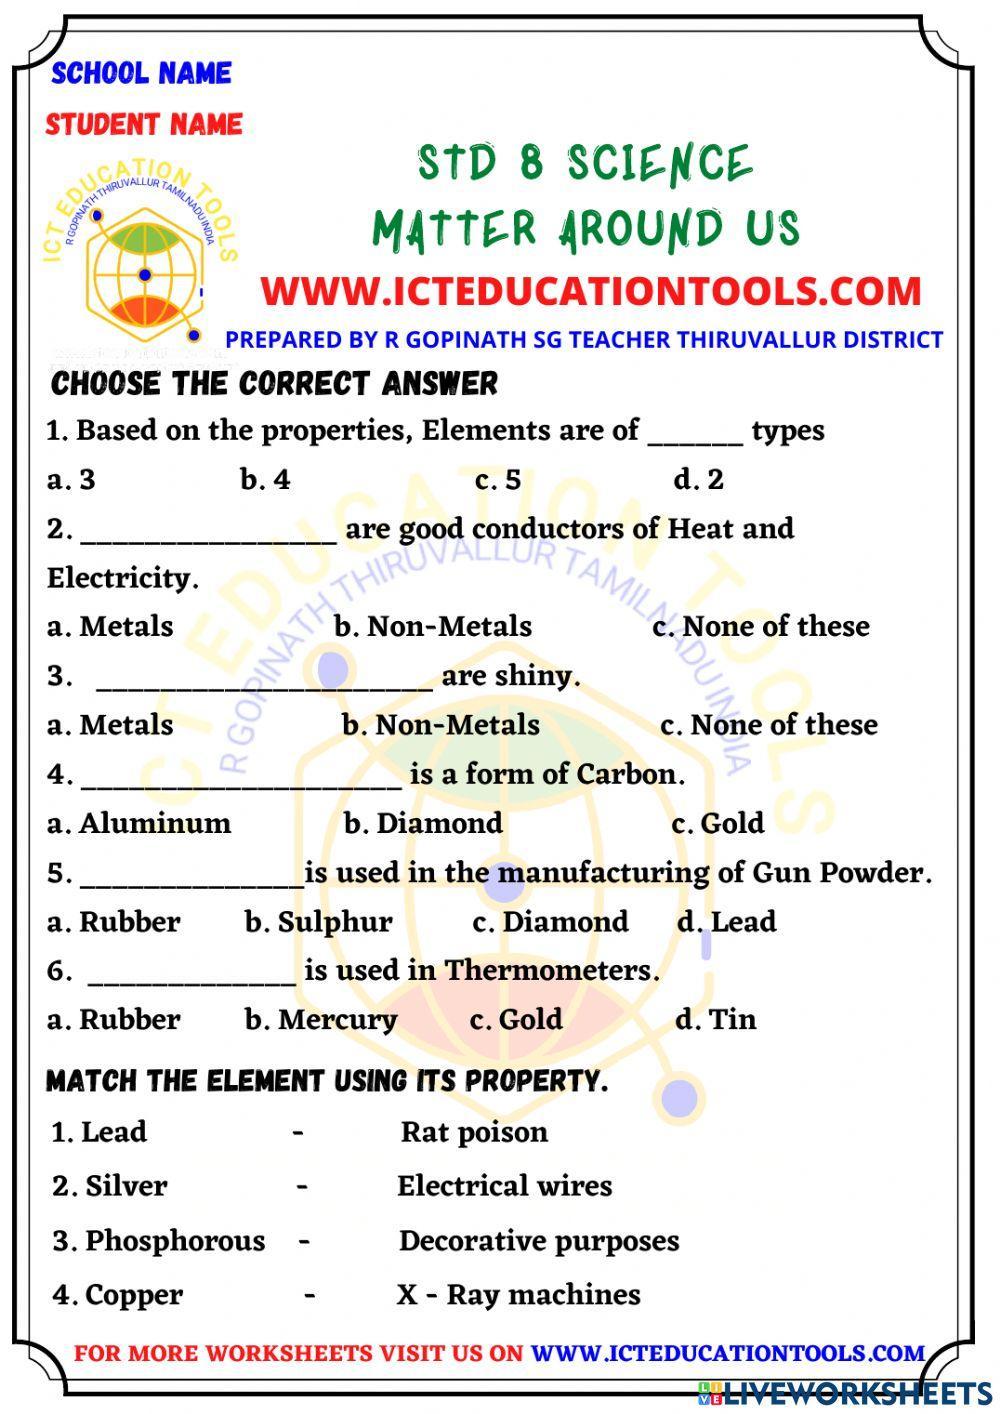 Std 8 science metals and non-metals eng med